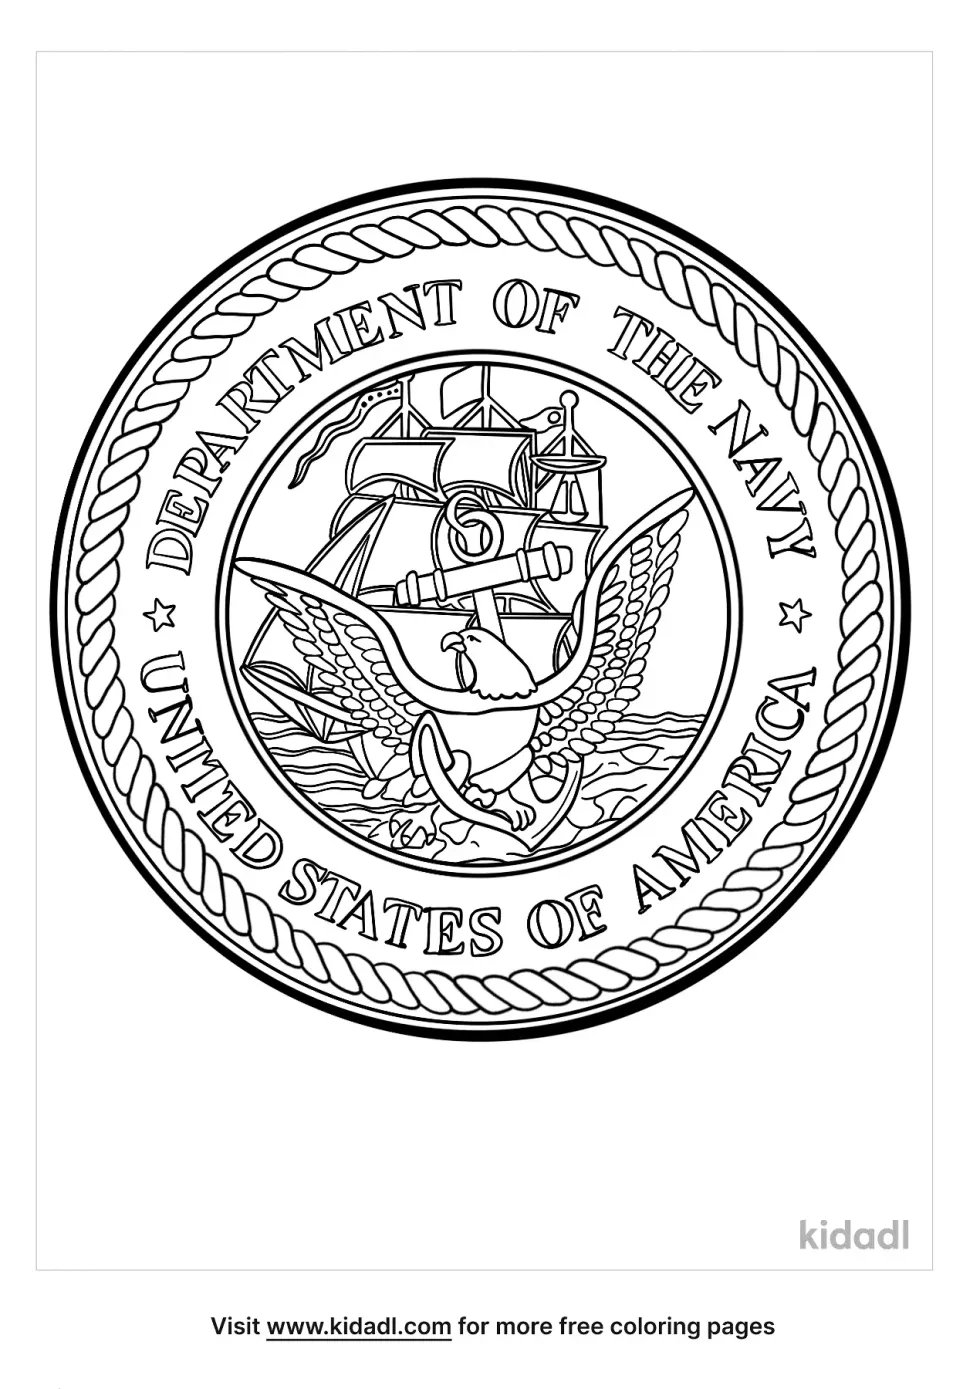 Navy Seal Coloring Page